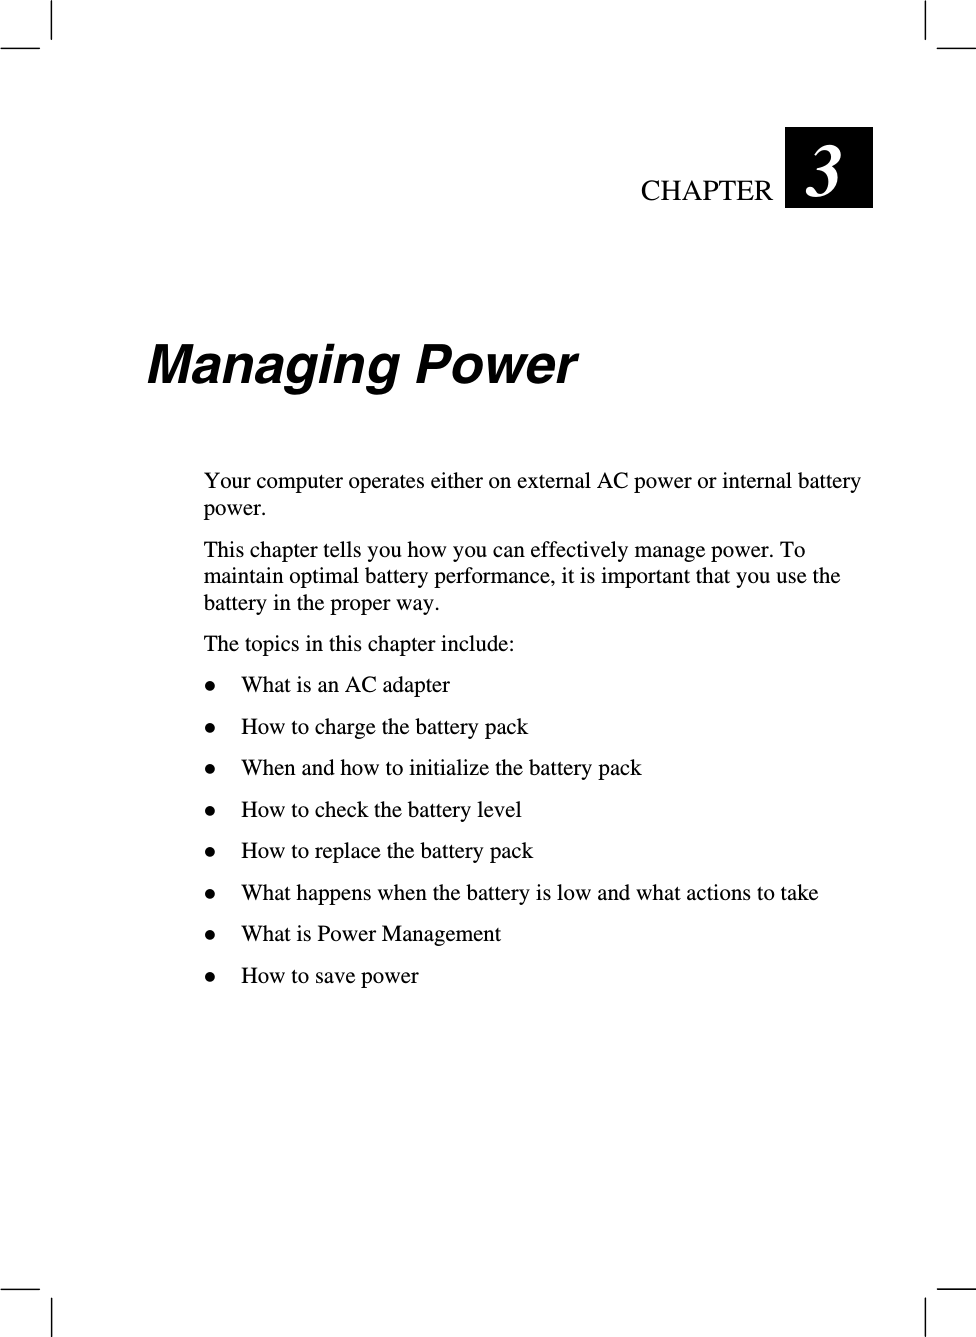 CHAPTER  3 Managing PowerYour computer operates either on external AC power or internal batterypower.This chapter tells you how you can effectively manage power. Tomaintain optimal battery performance, it is important that you use thebattery in the proper way.The topics in this chapter include:z What is an AC adapterz How to charge the battery packz When and how to initialize the battery packz How to check the battery levelz How to replace the battery packz What happens when the battery is low and what actions to takez What is Power Managementz How to save power